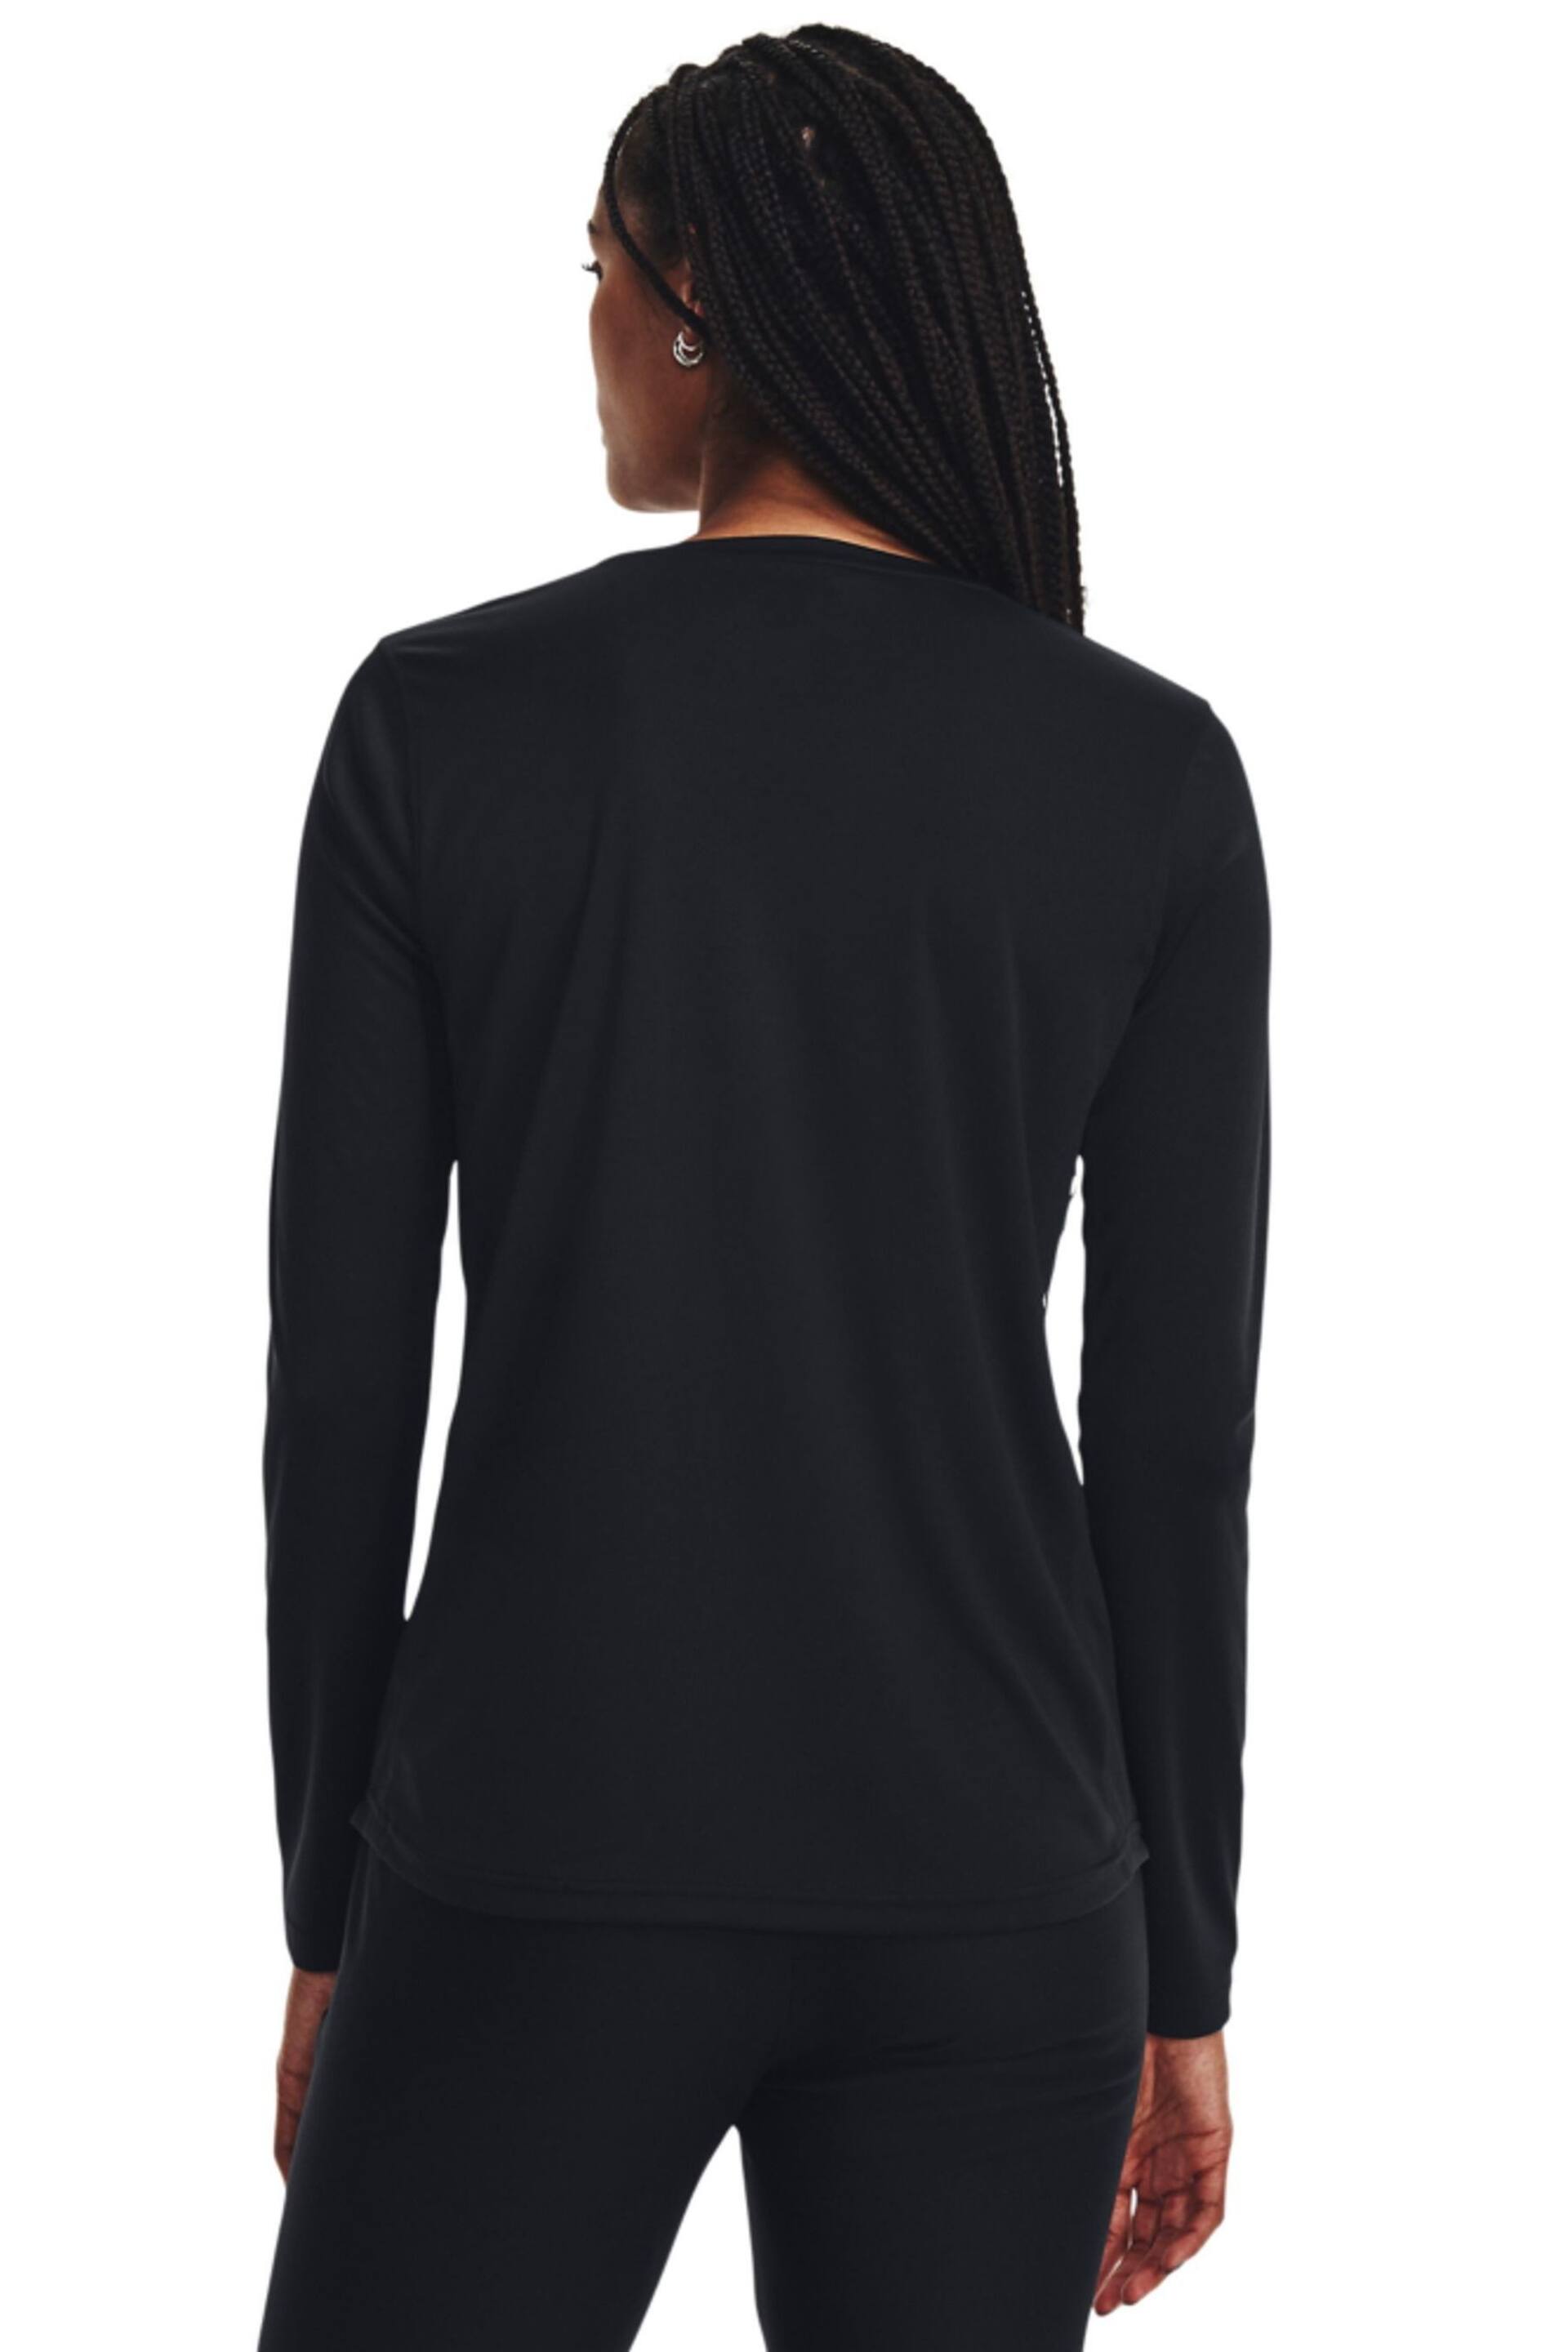 Under Armour Challenger Train Long Sleeve T-Shirt - Image 2 of 4